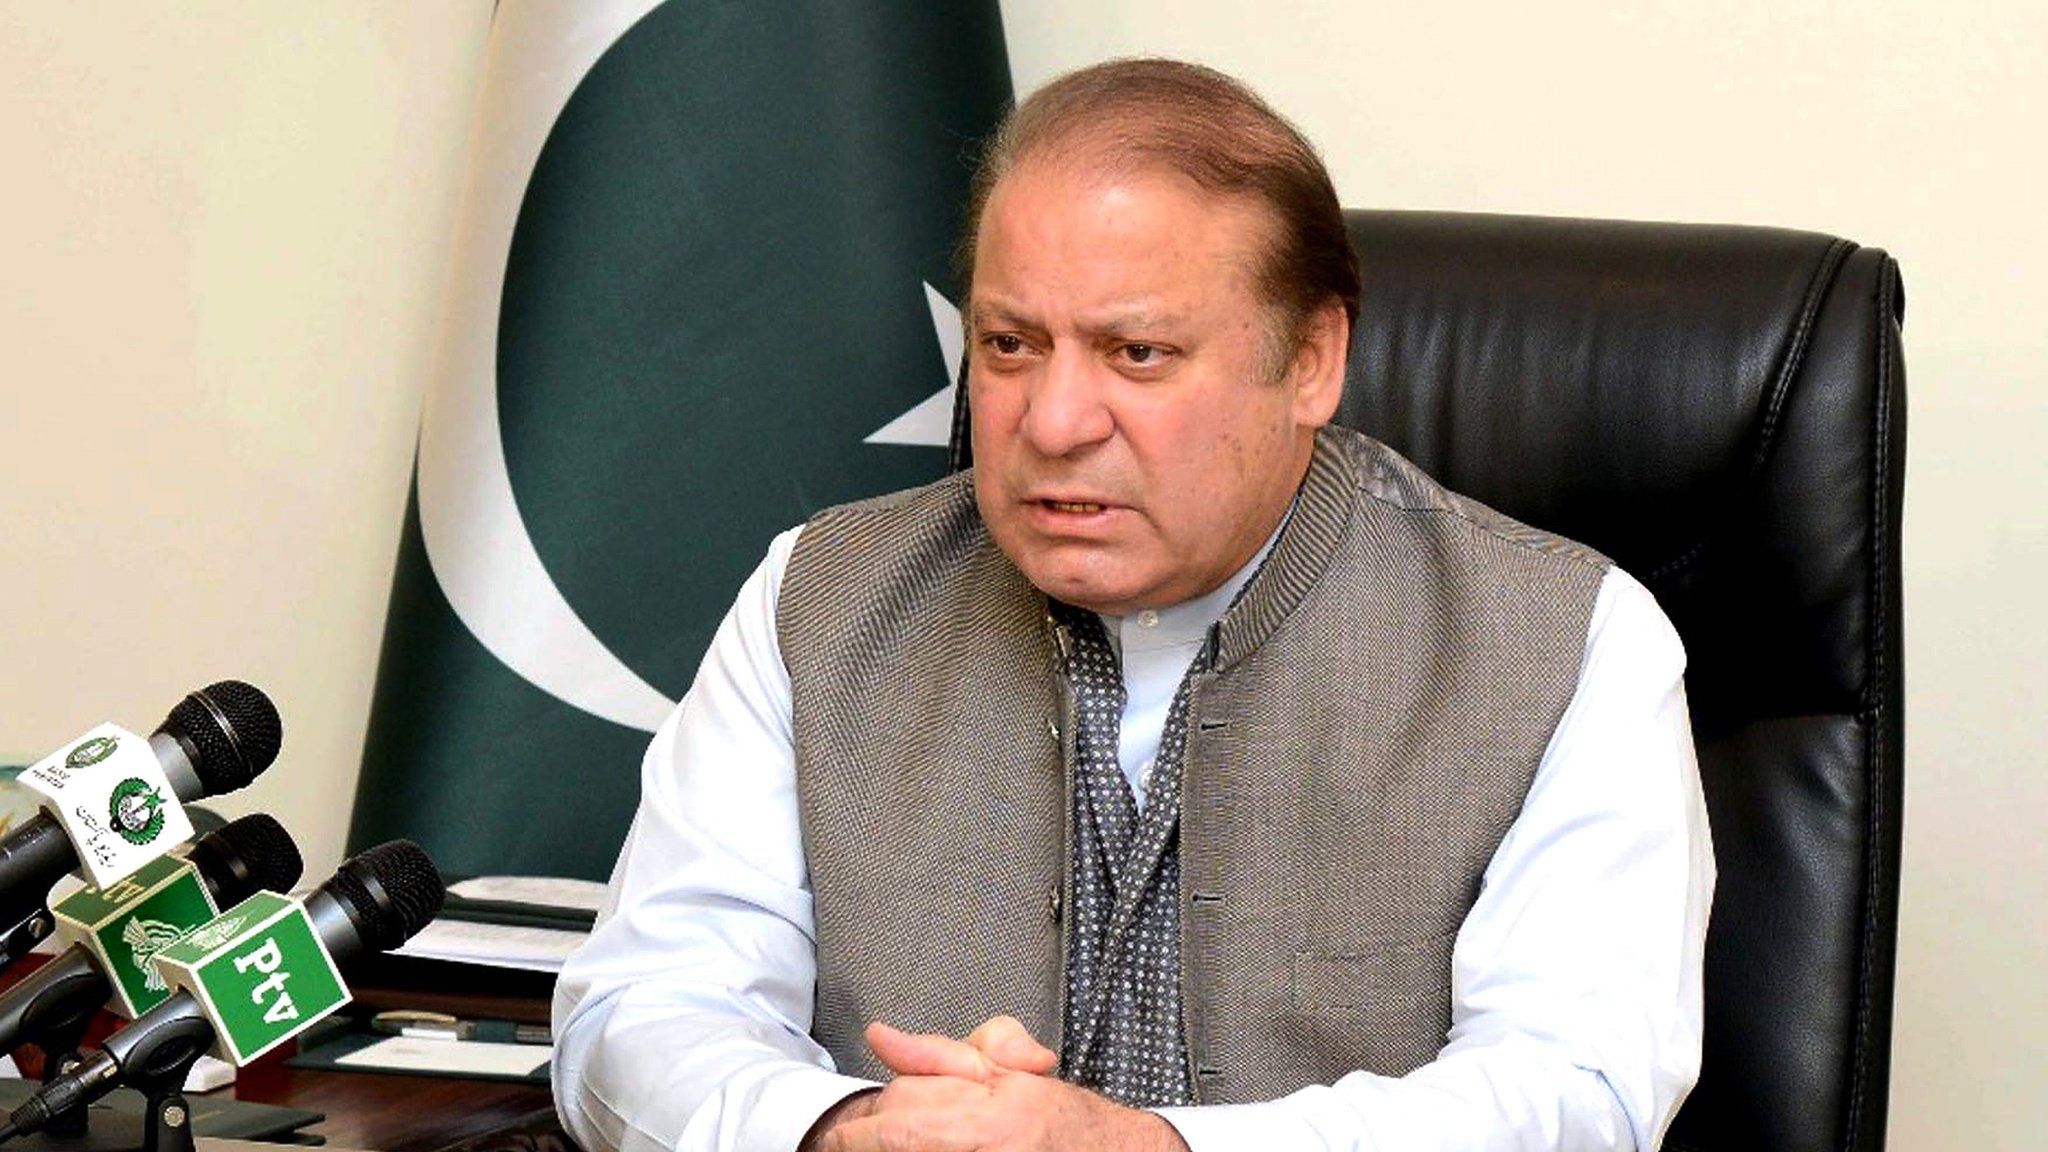 A handout picture released by the Pakistan Press Information Department (PID) on March 28, 2016, shows Pakistan"s Prime Minister Nawaz Sharif addressing the nation at his office in Islamabad